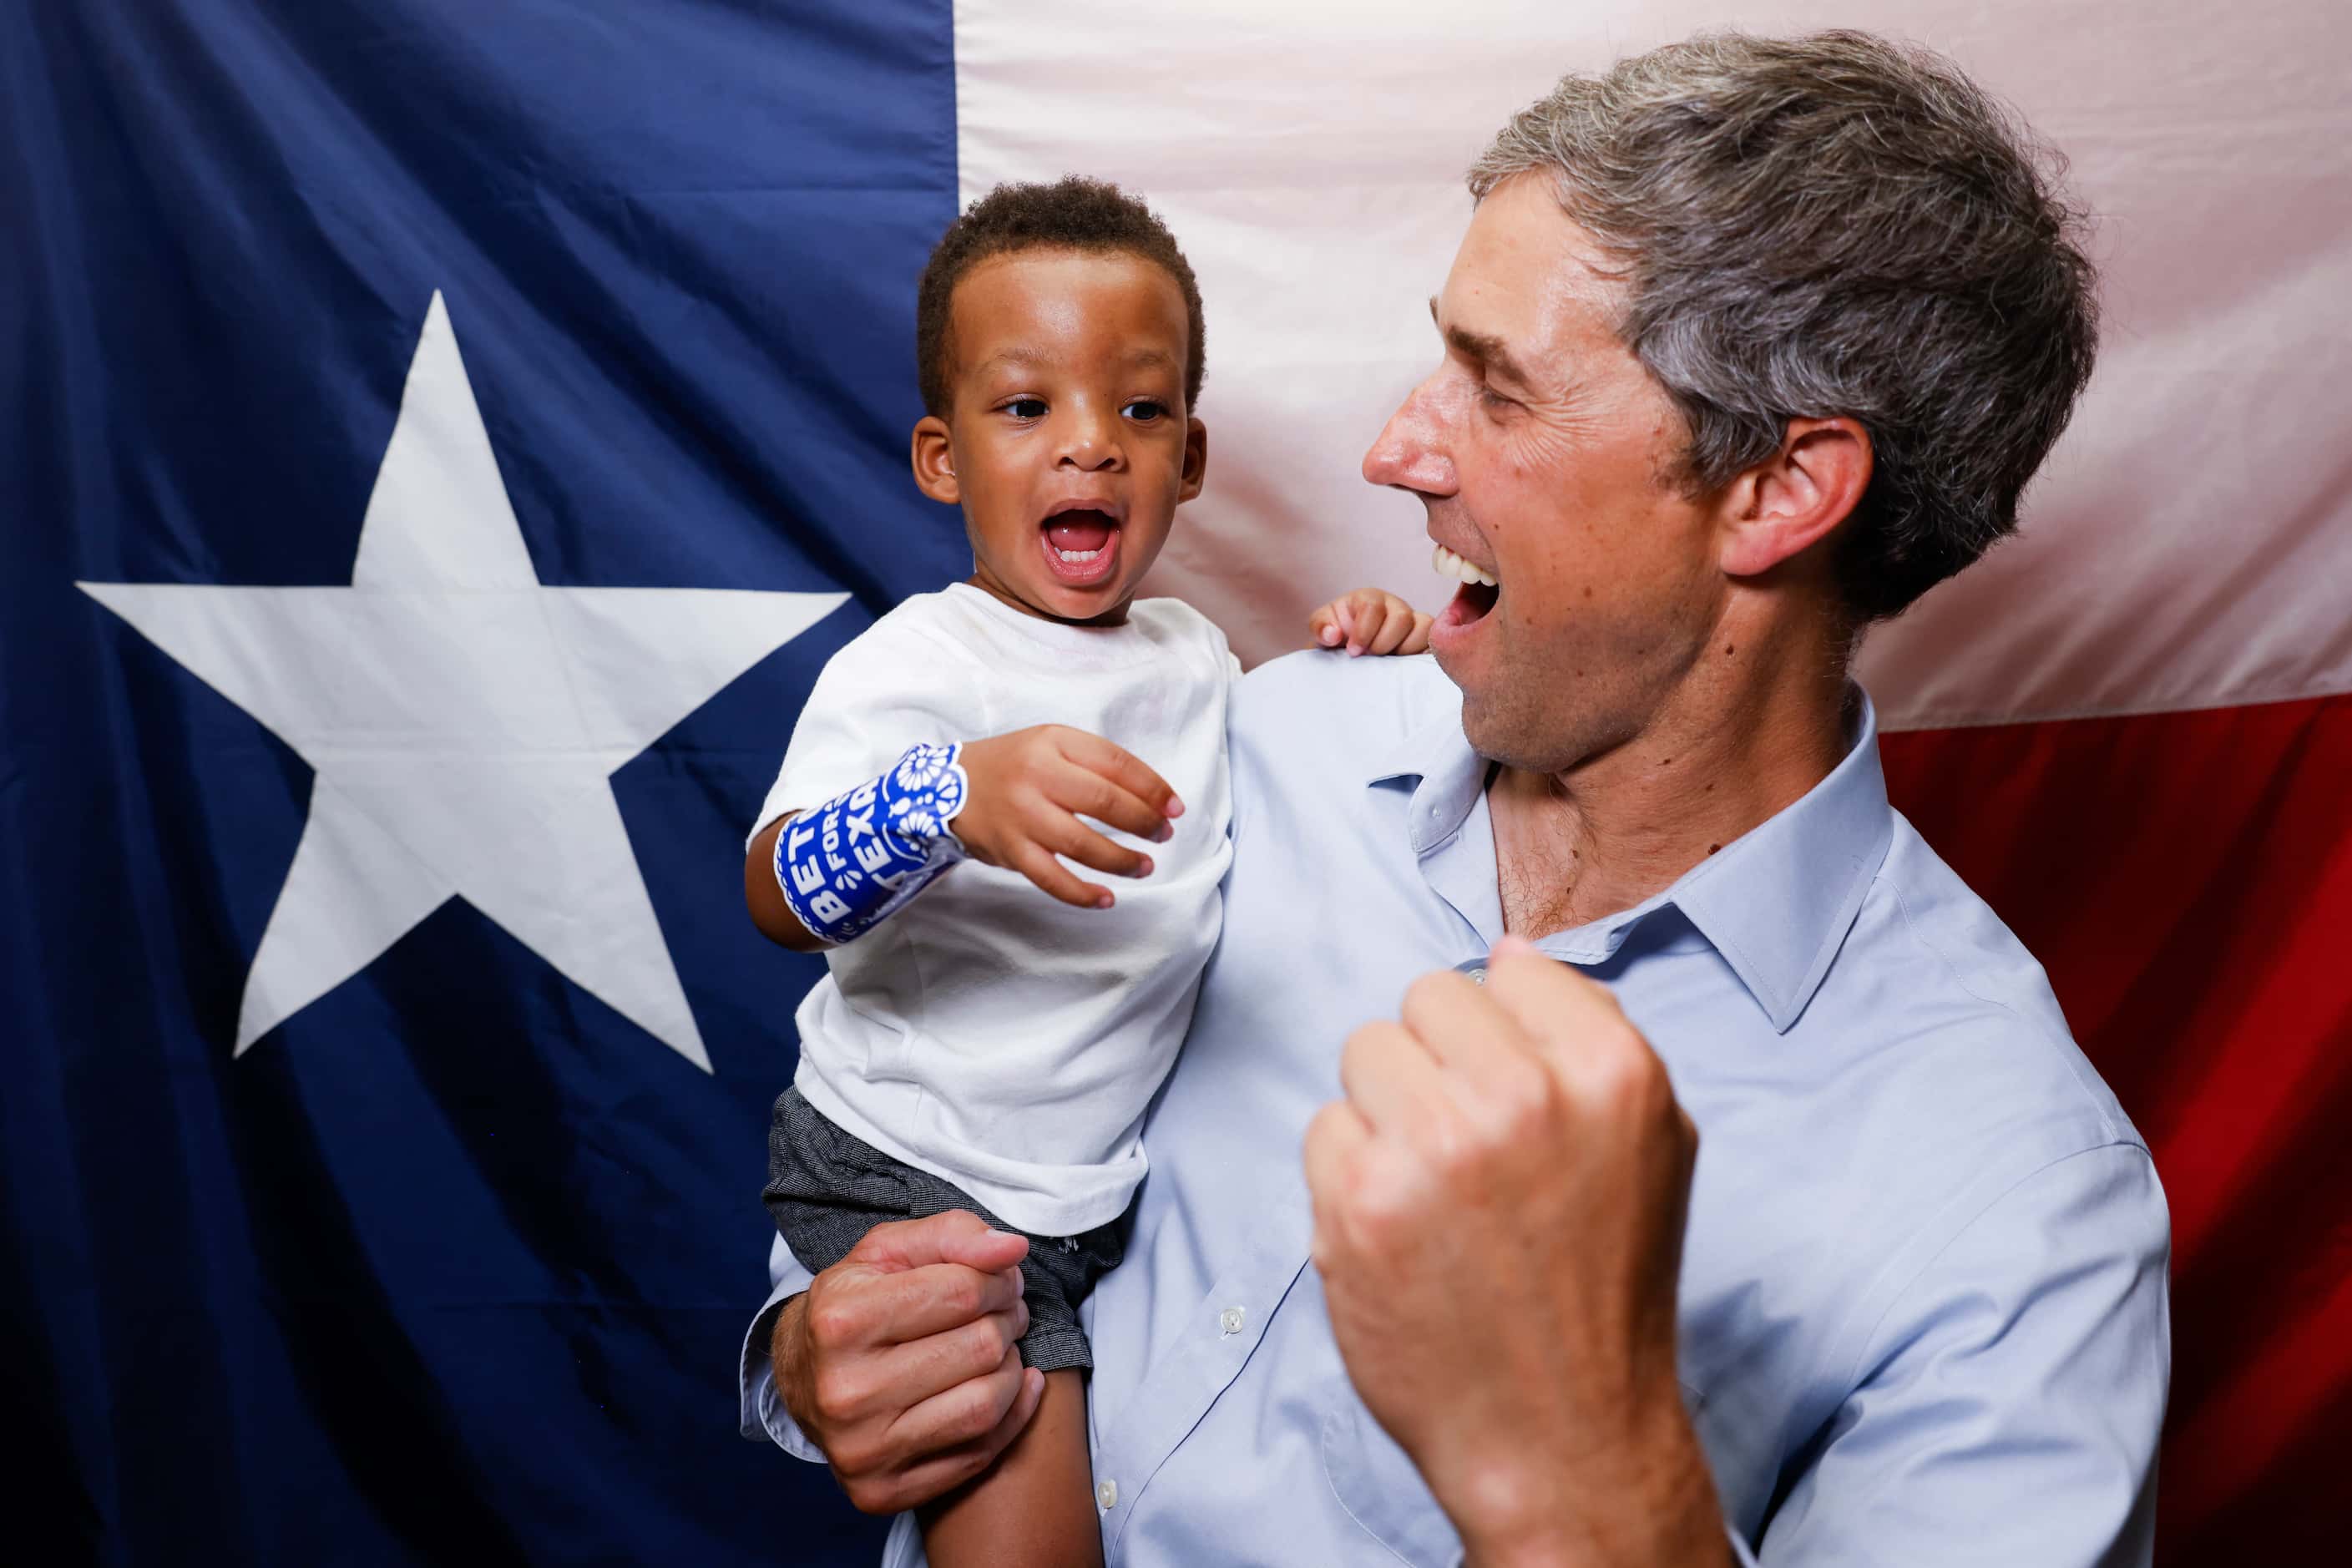 Texas Governor candidate Beto O'Rourke, right, reacts towards Hayden Hammonds, 1, as they...